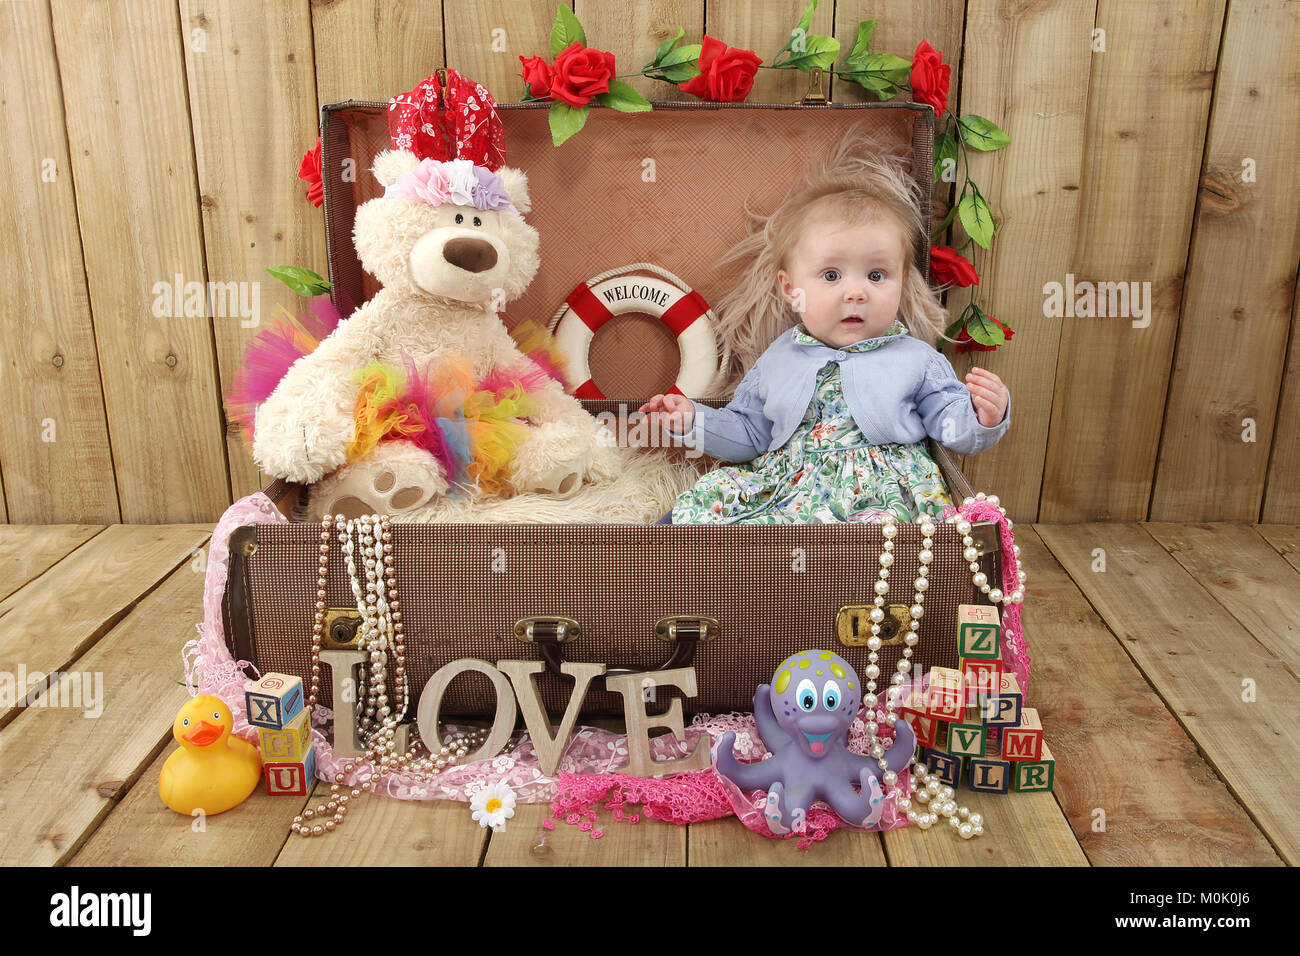 7 months old girl, infant playing in nursery Stock Photo